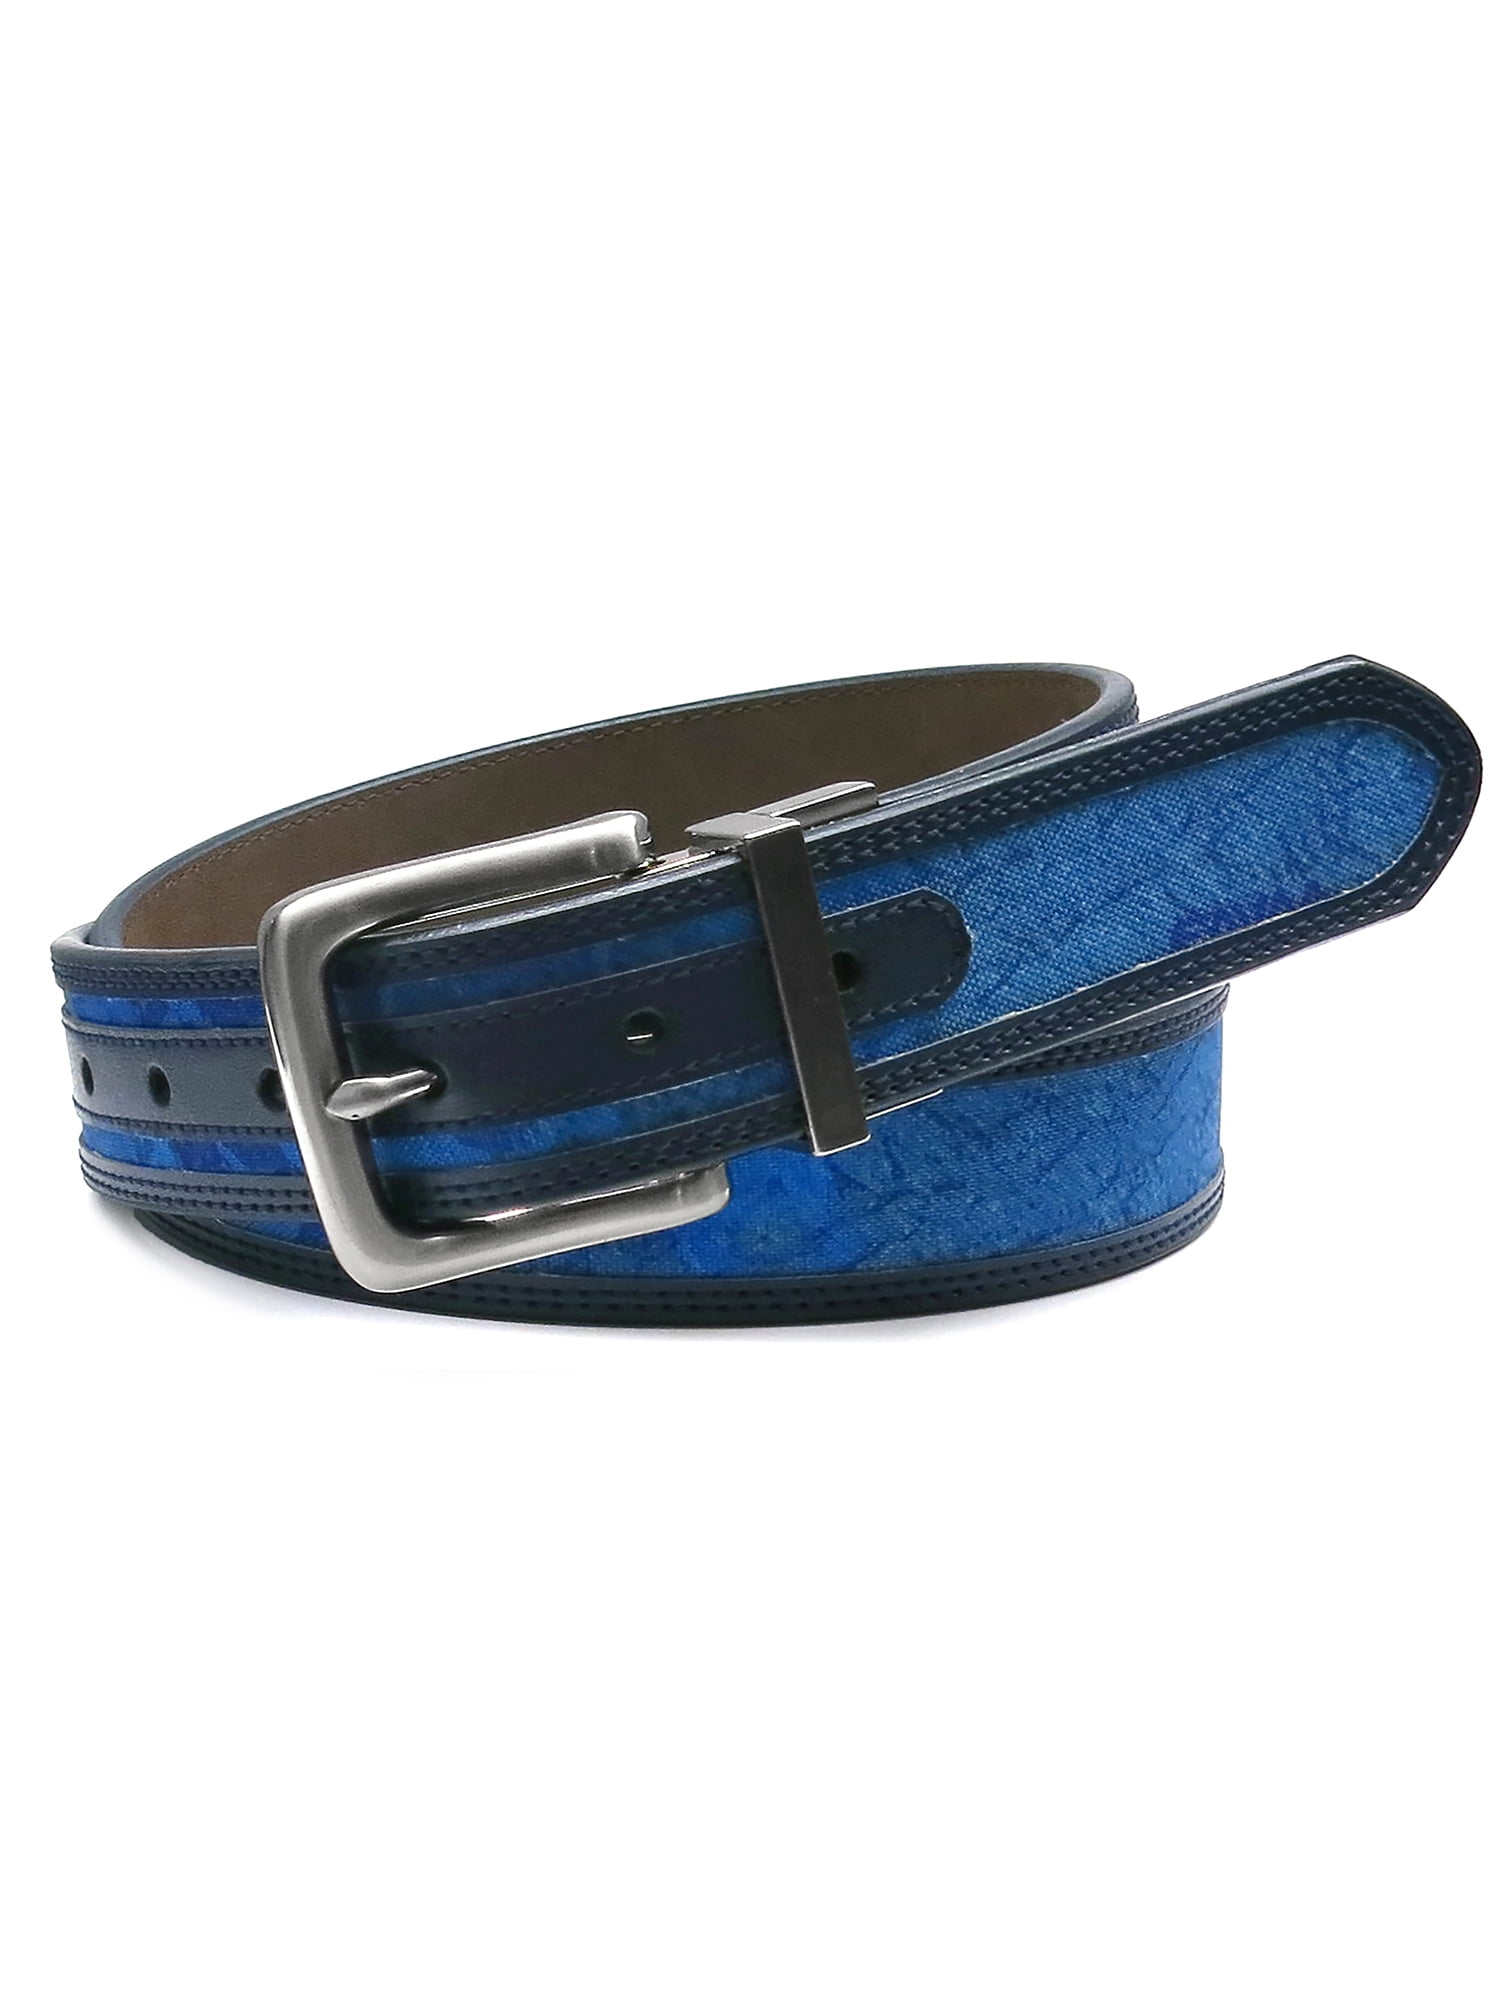 Burberry Double B Leather Belt in Black